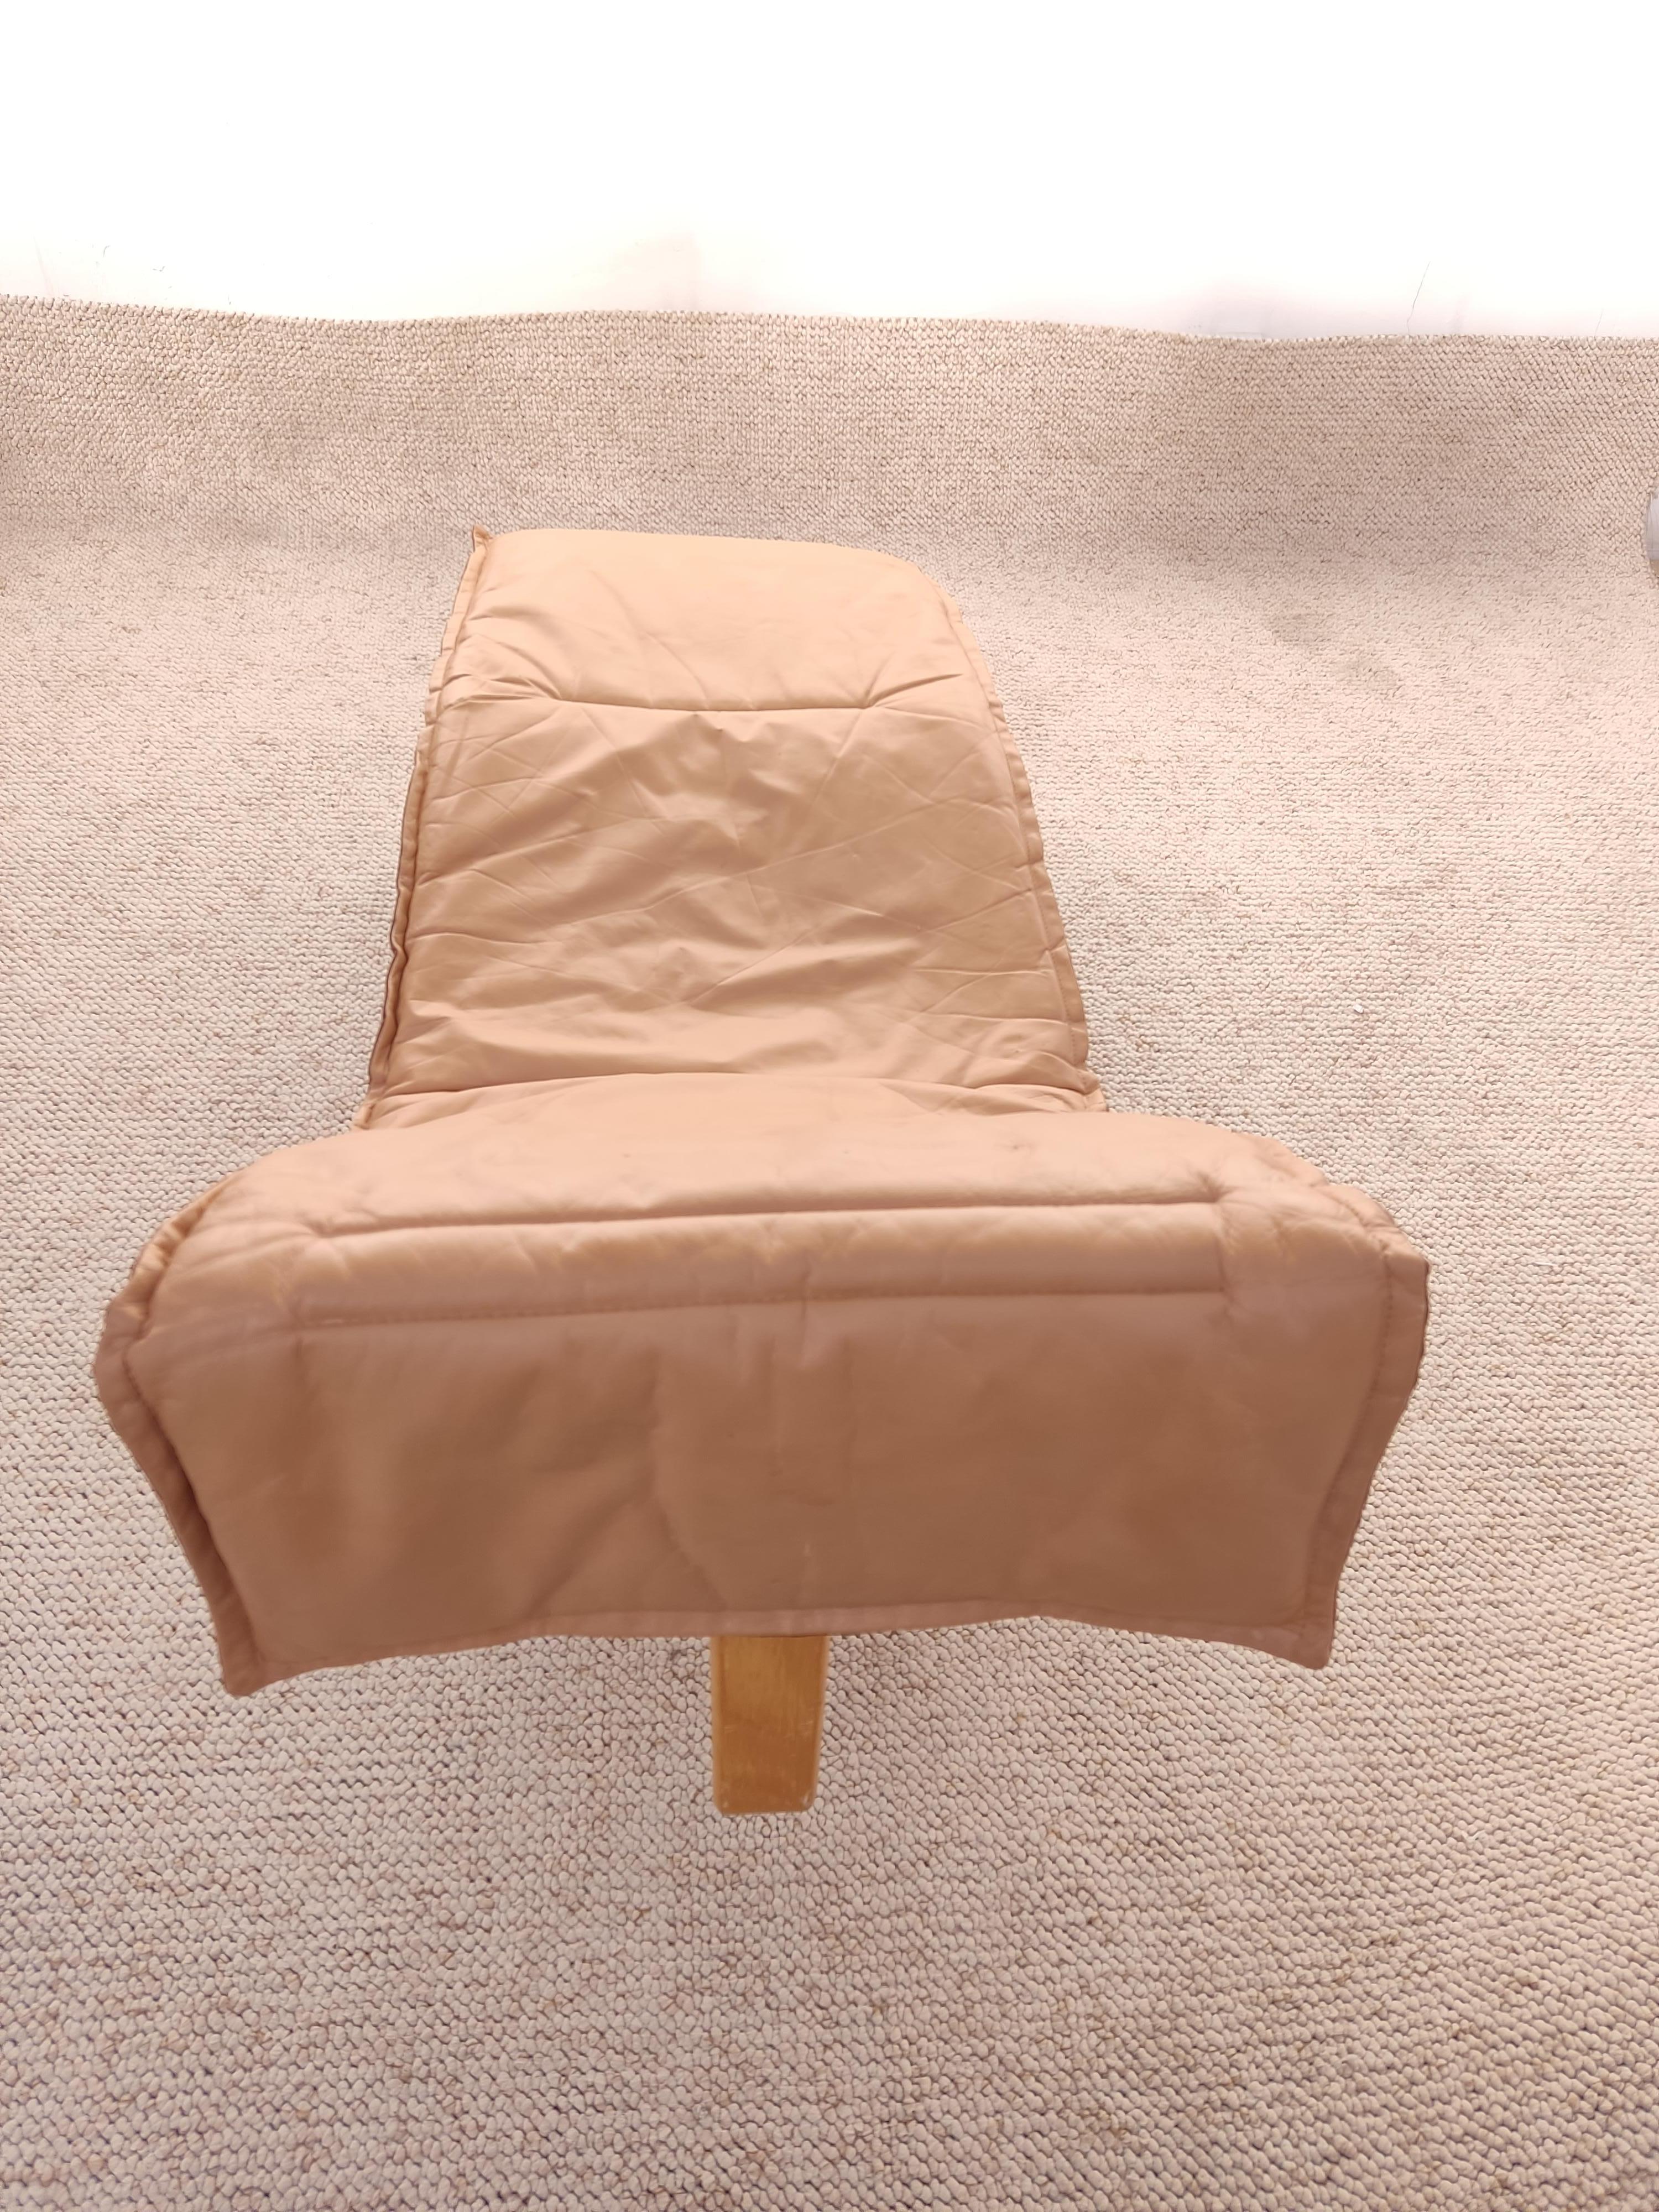 Chaise-Longue Ingmar & Relling, Camel Leather, 1970 2